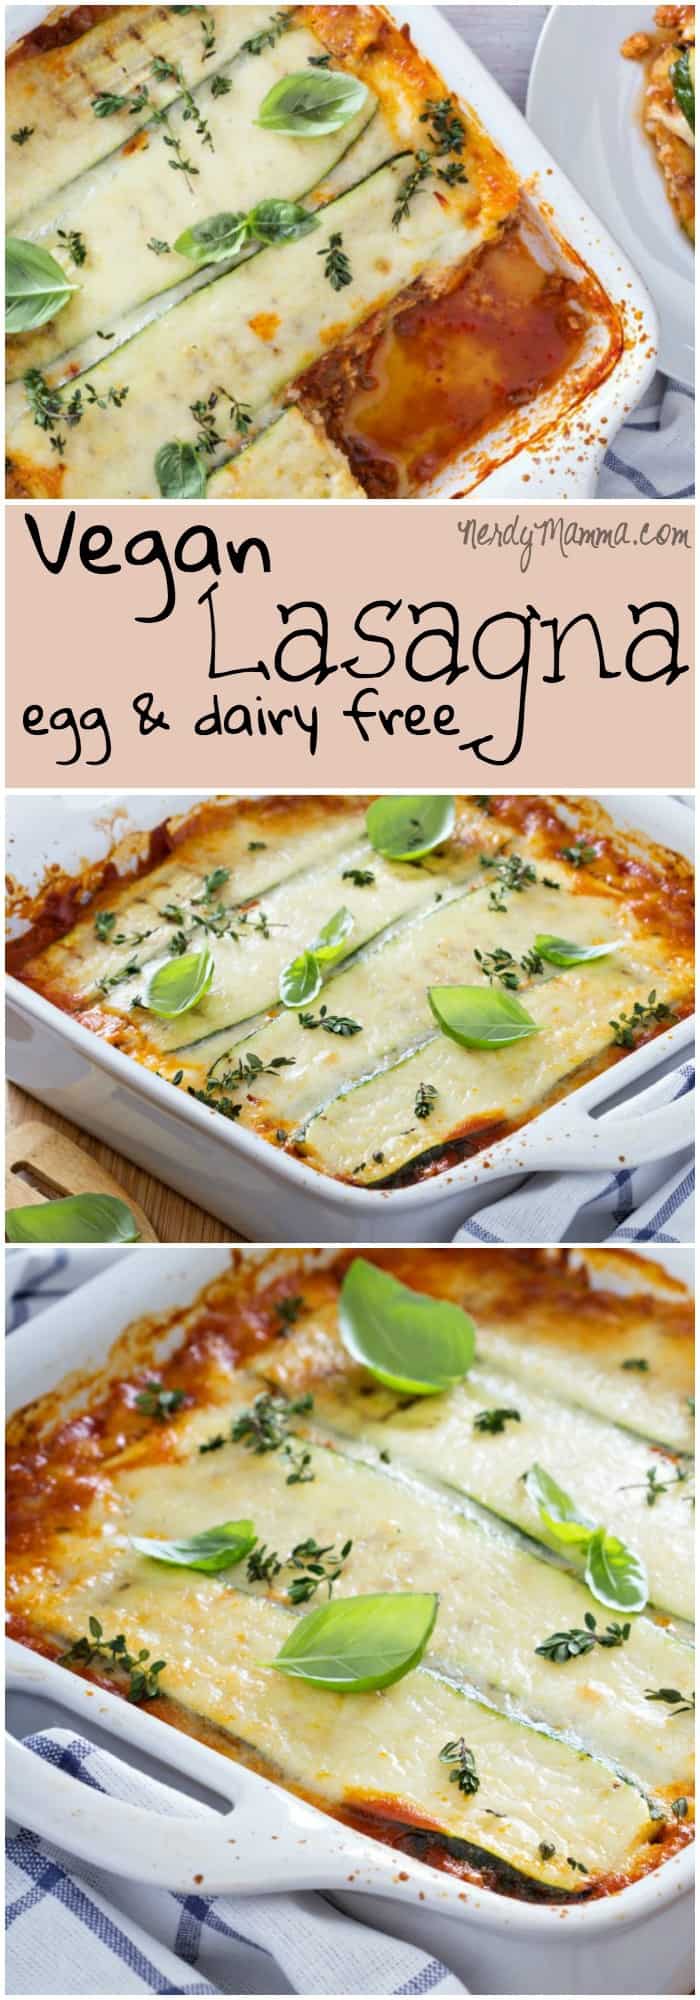 This vegan lasagna is so delicious. It's easy, too. I am just so happy to have an eggless and dairy-free alternative to normal lasagna. AWESOME!